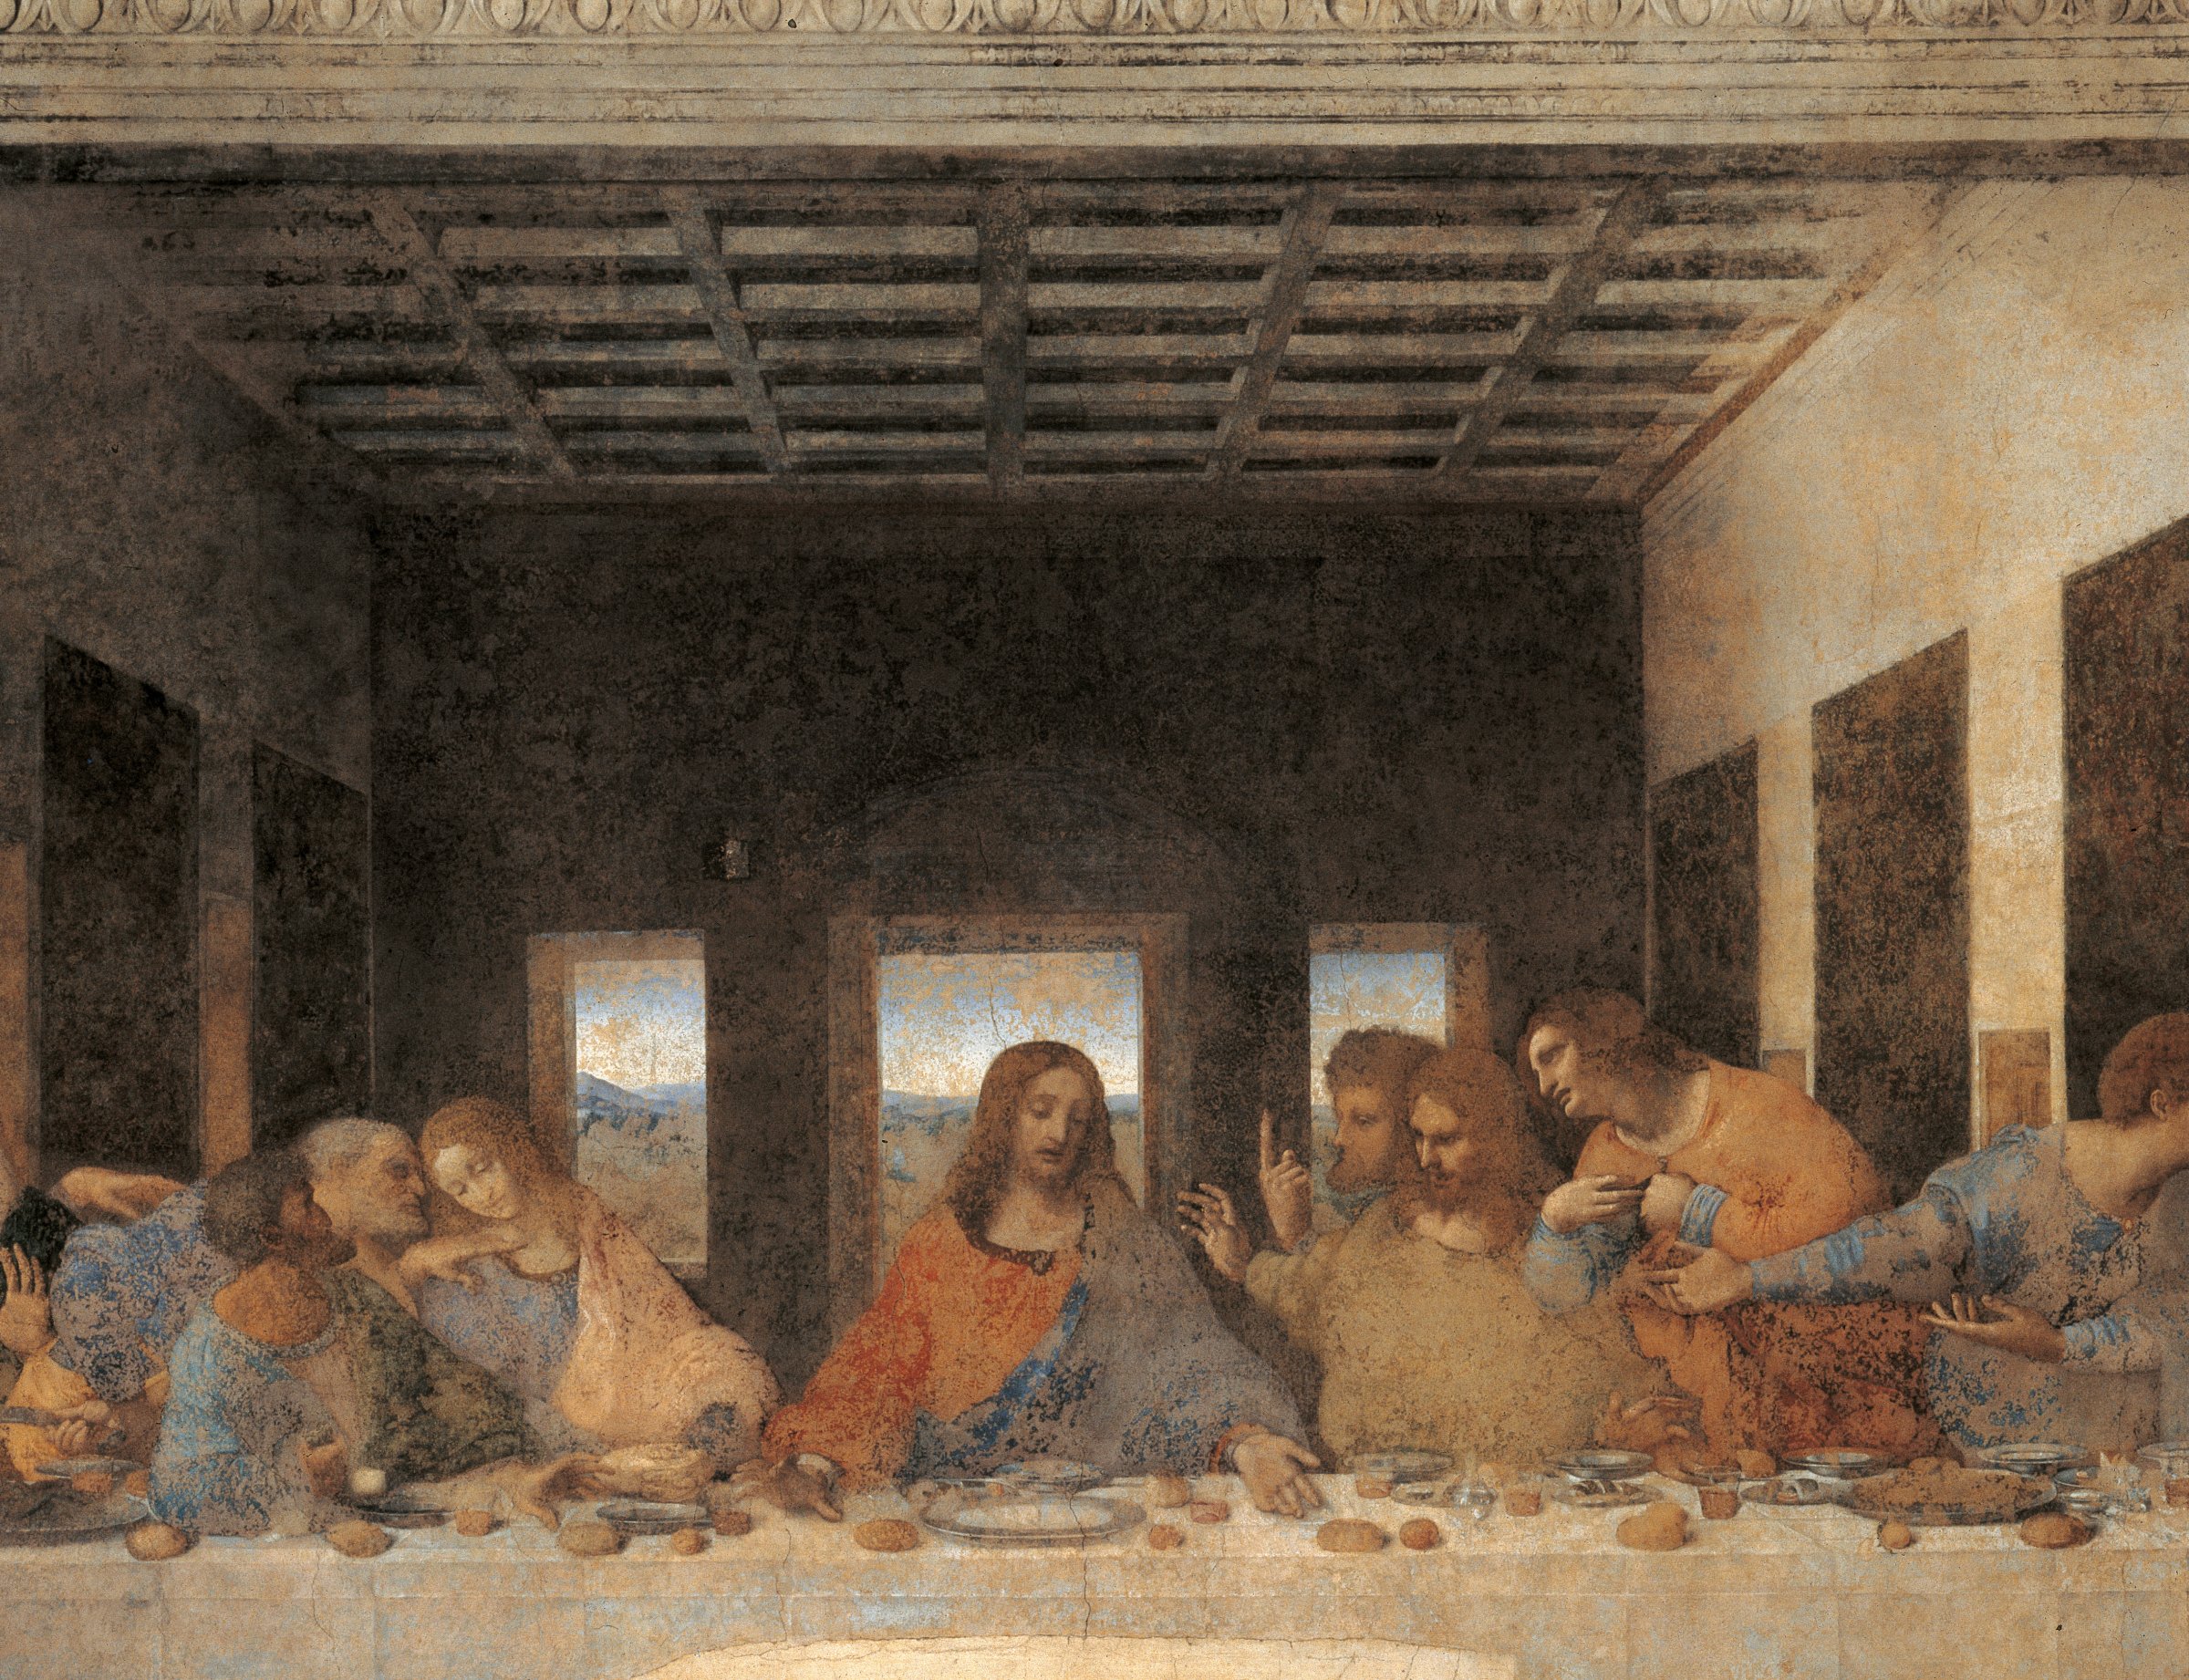 The Last Supper, by Leonardo da Vinci, 1495 - 1497 about, 15th Century, tempera and oil on two layers of plaster, cm 460 x 880 .